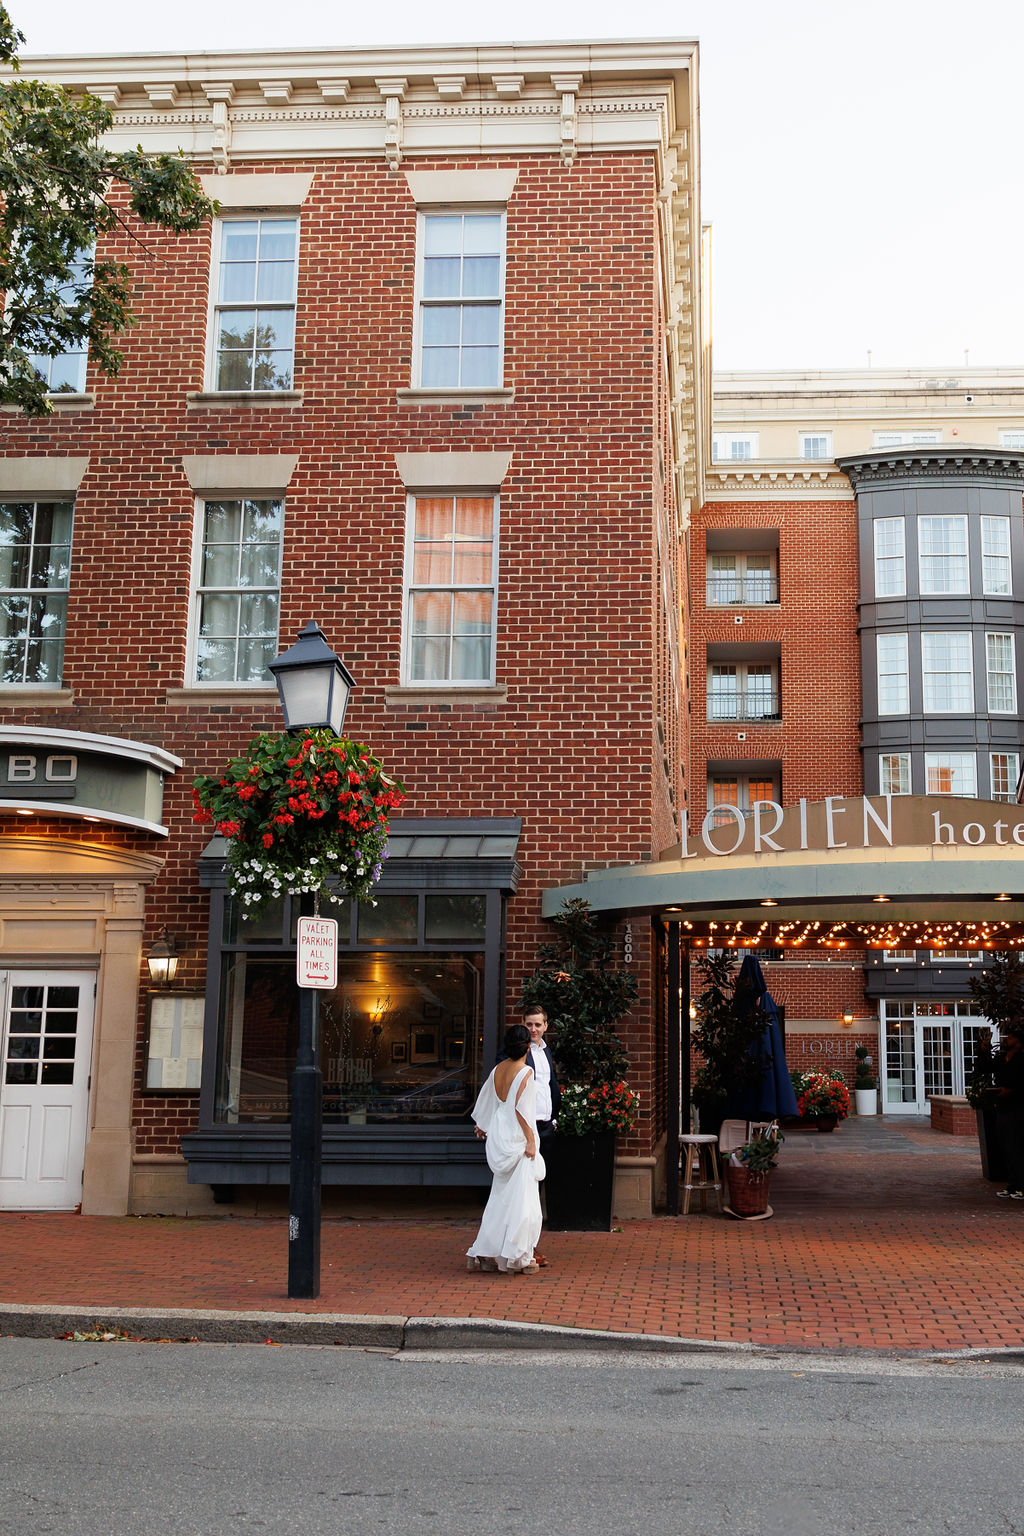 Newlyweds walk together on the brick pathways outside the lorien hotel wedding venue